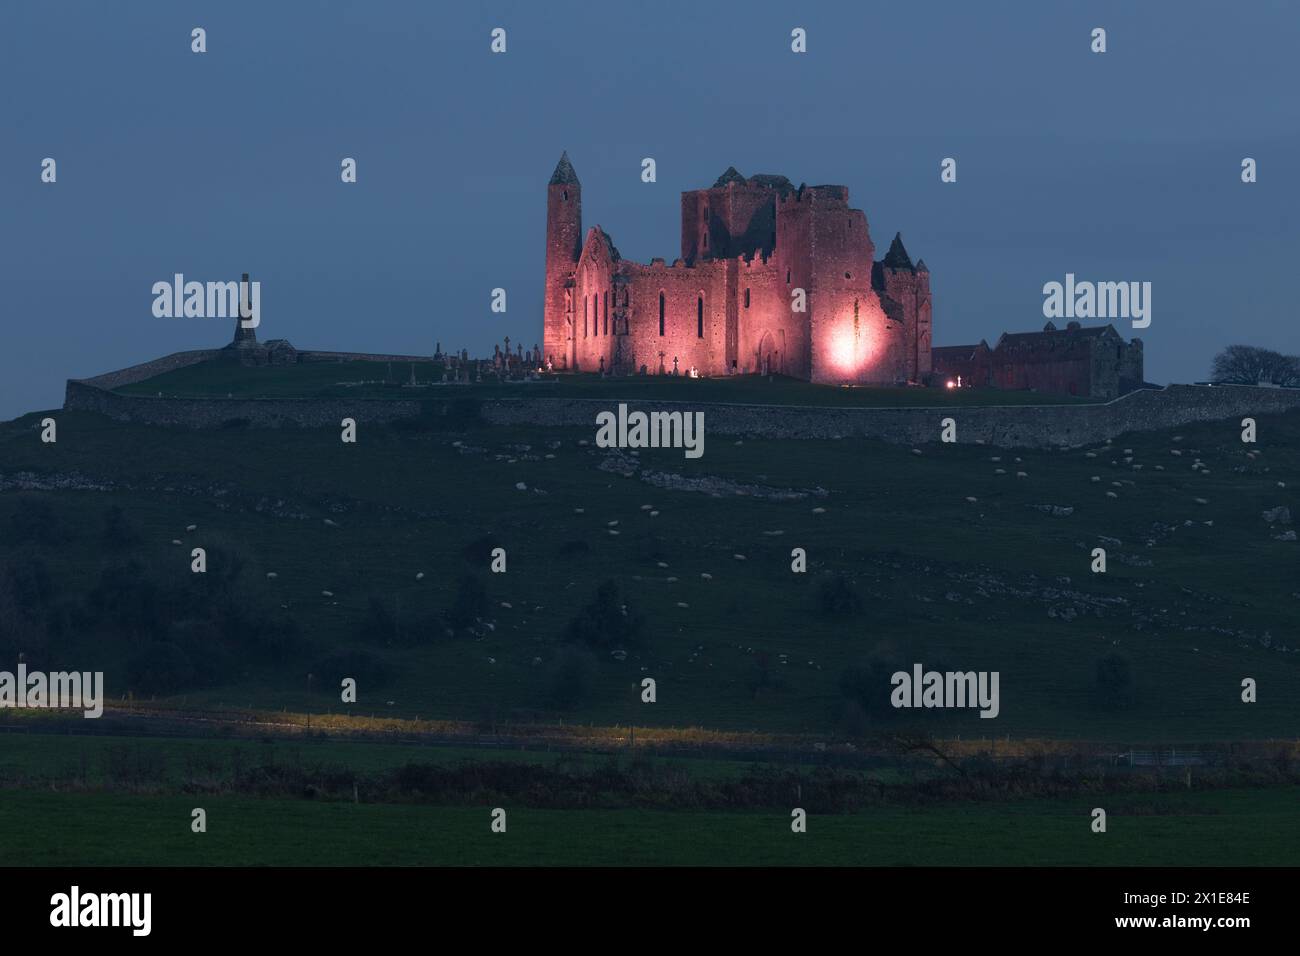 Illuminated view of Rock of Cashel in County Tipperary in Ireland Europe Stock Photo